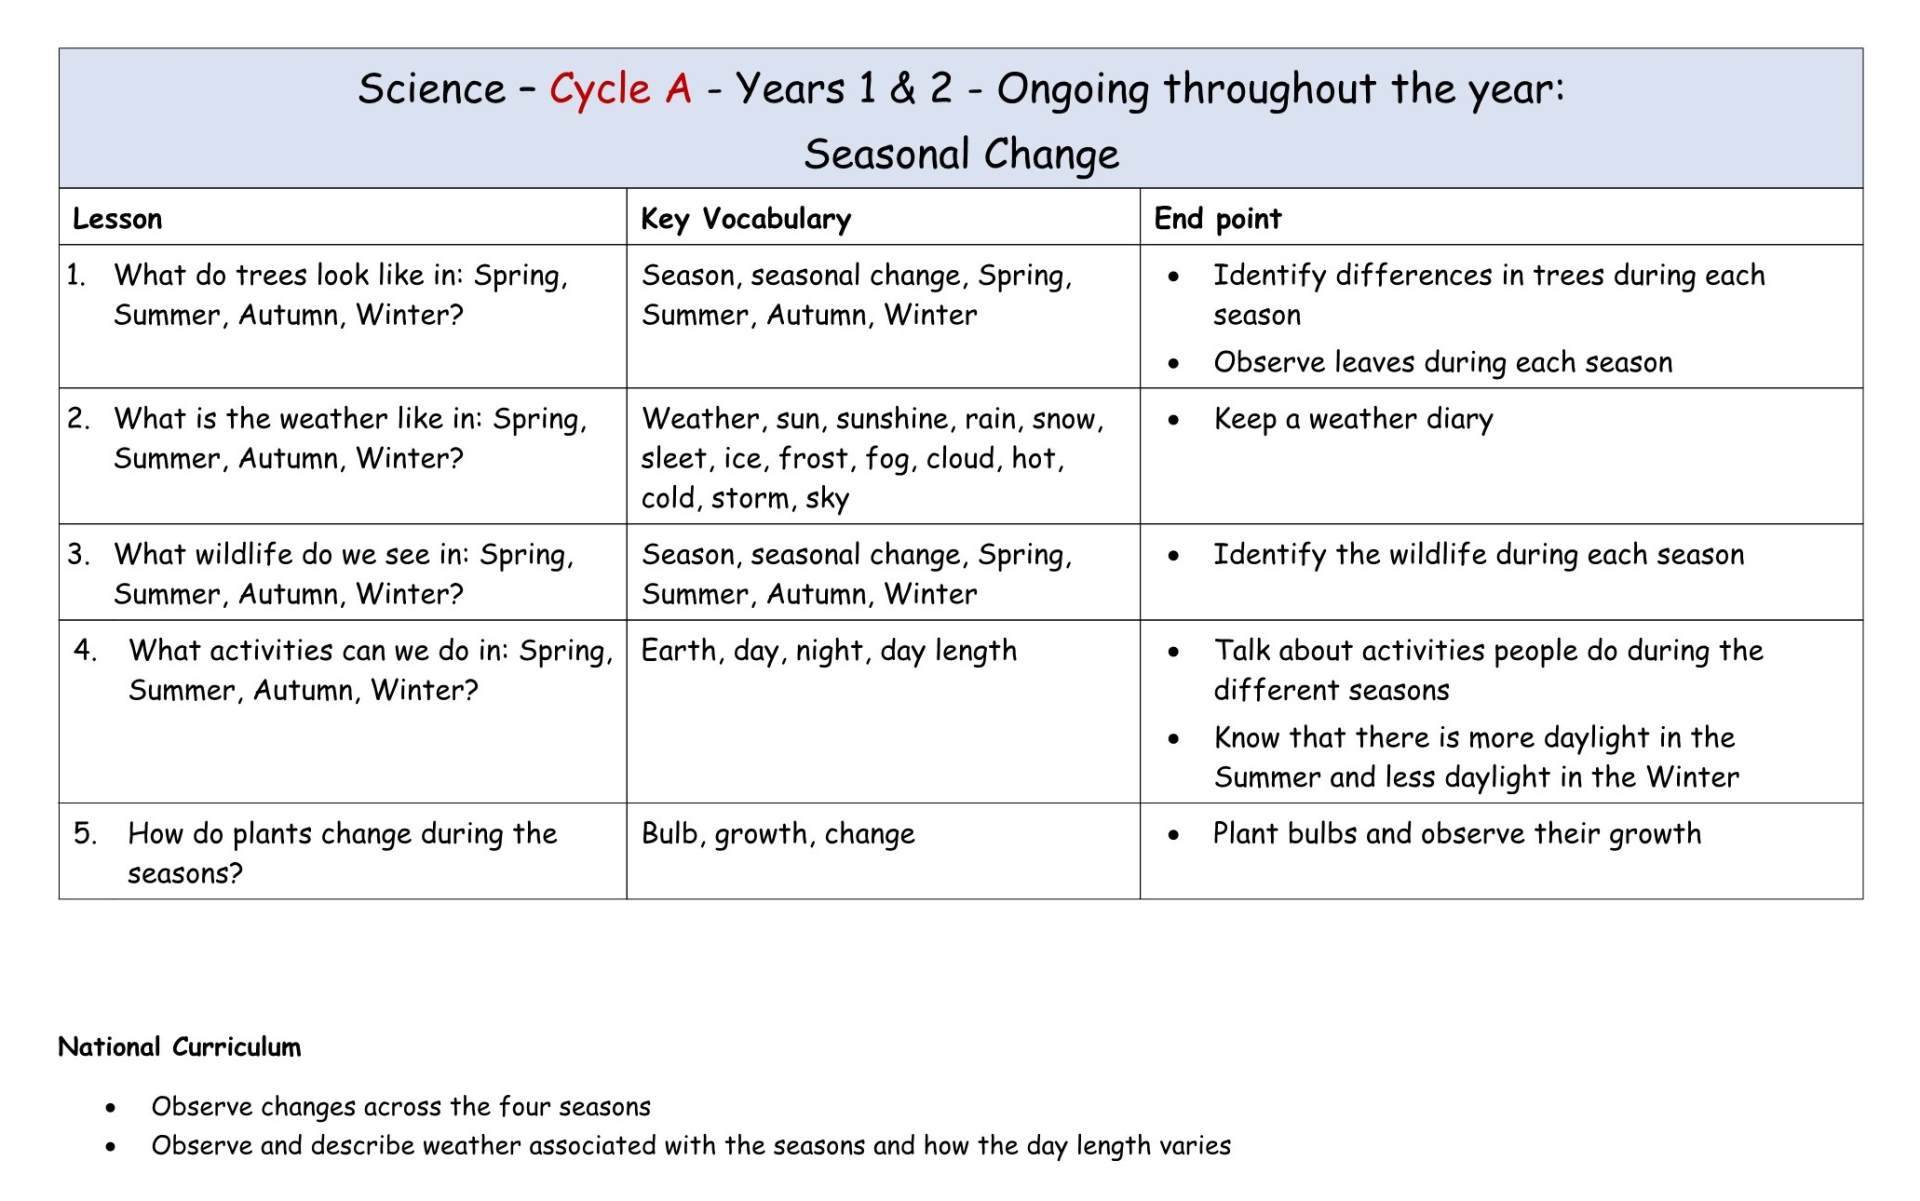 Science Cycle A MTP ongoing